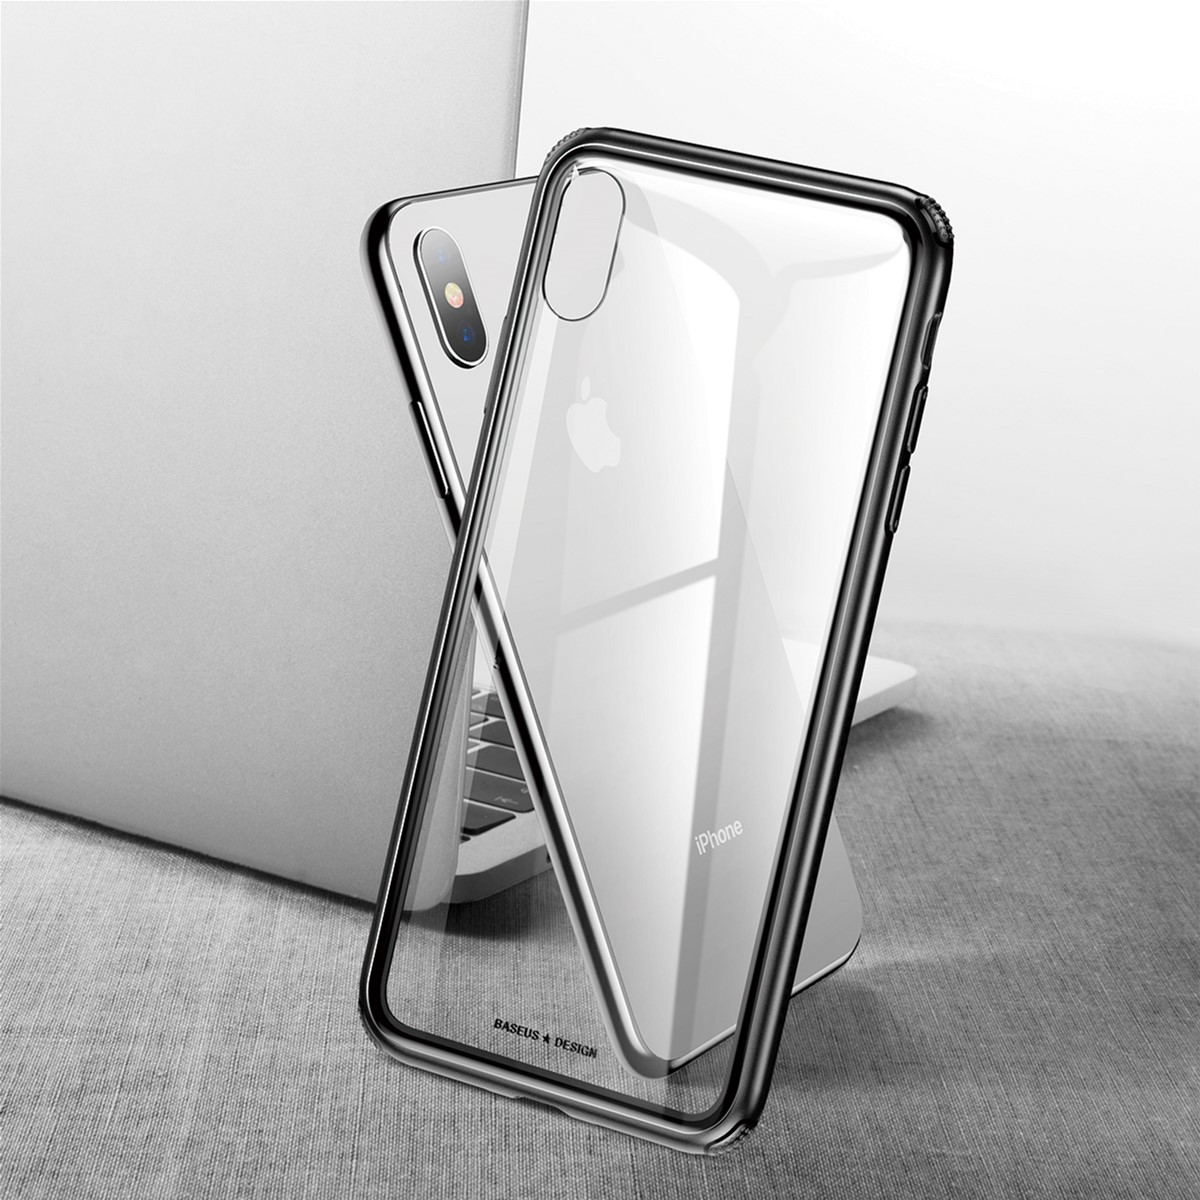 Чехол Baseus See-through glass protective case for iPhone Xs Max - Black